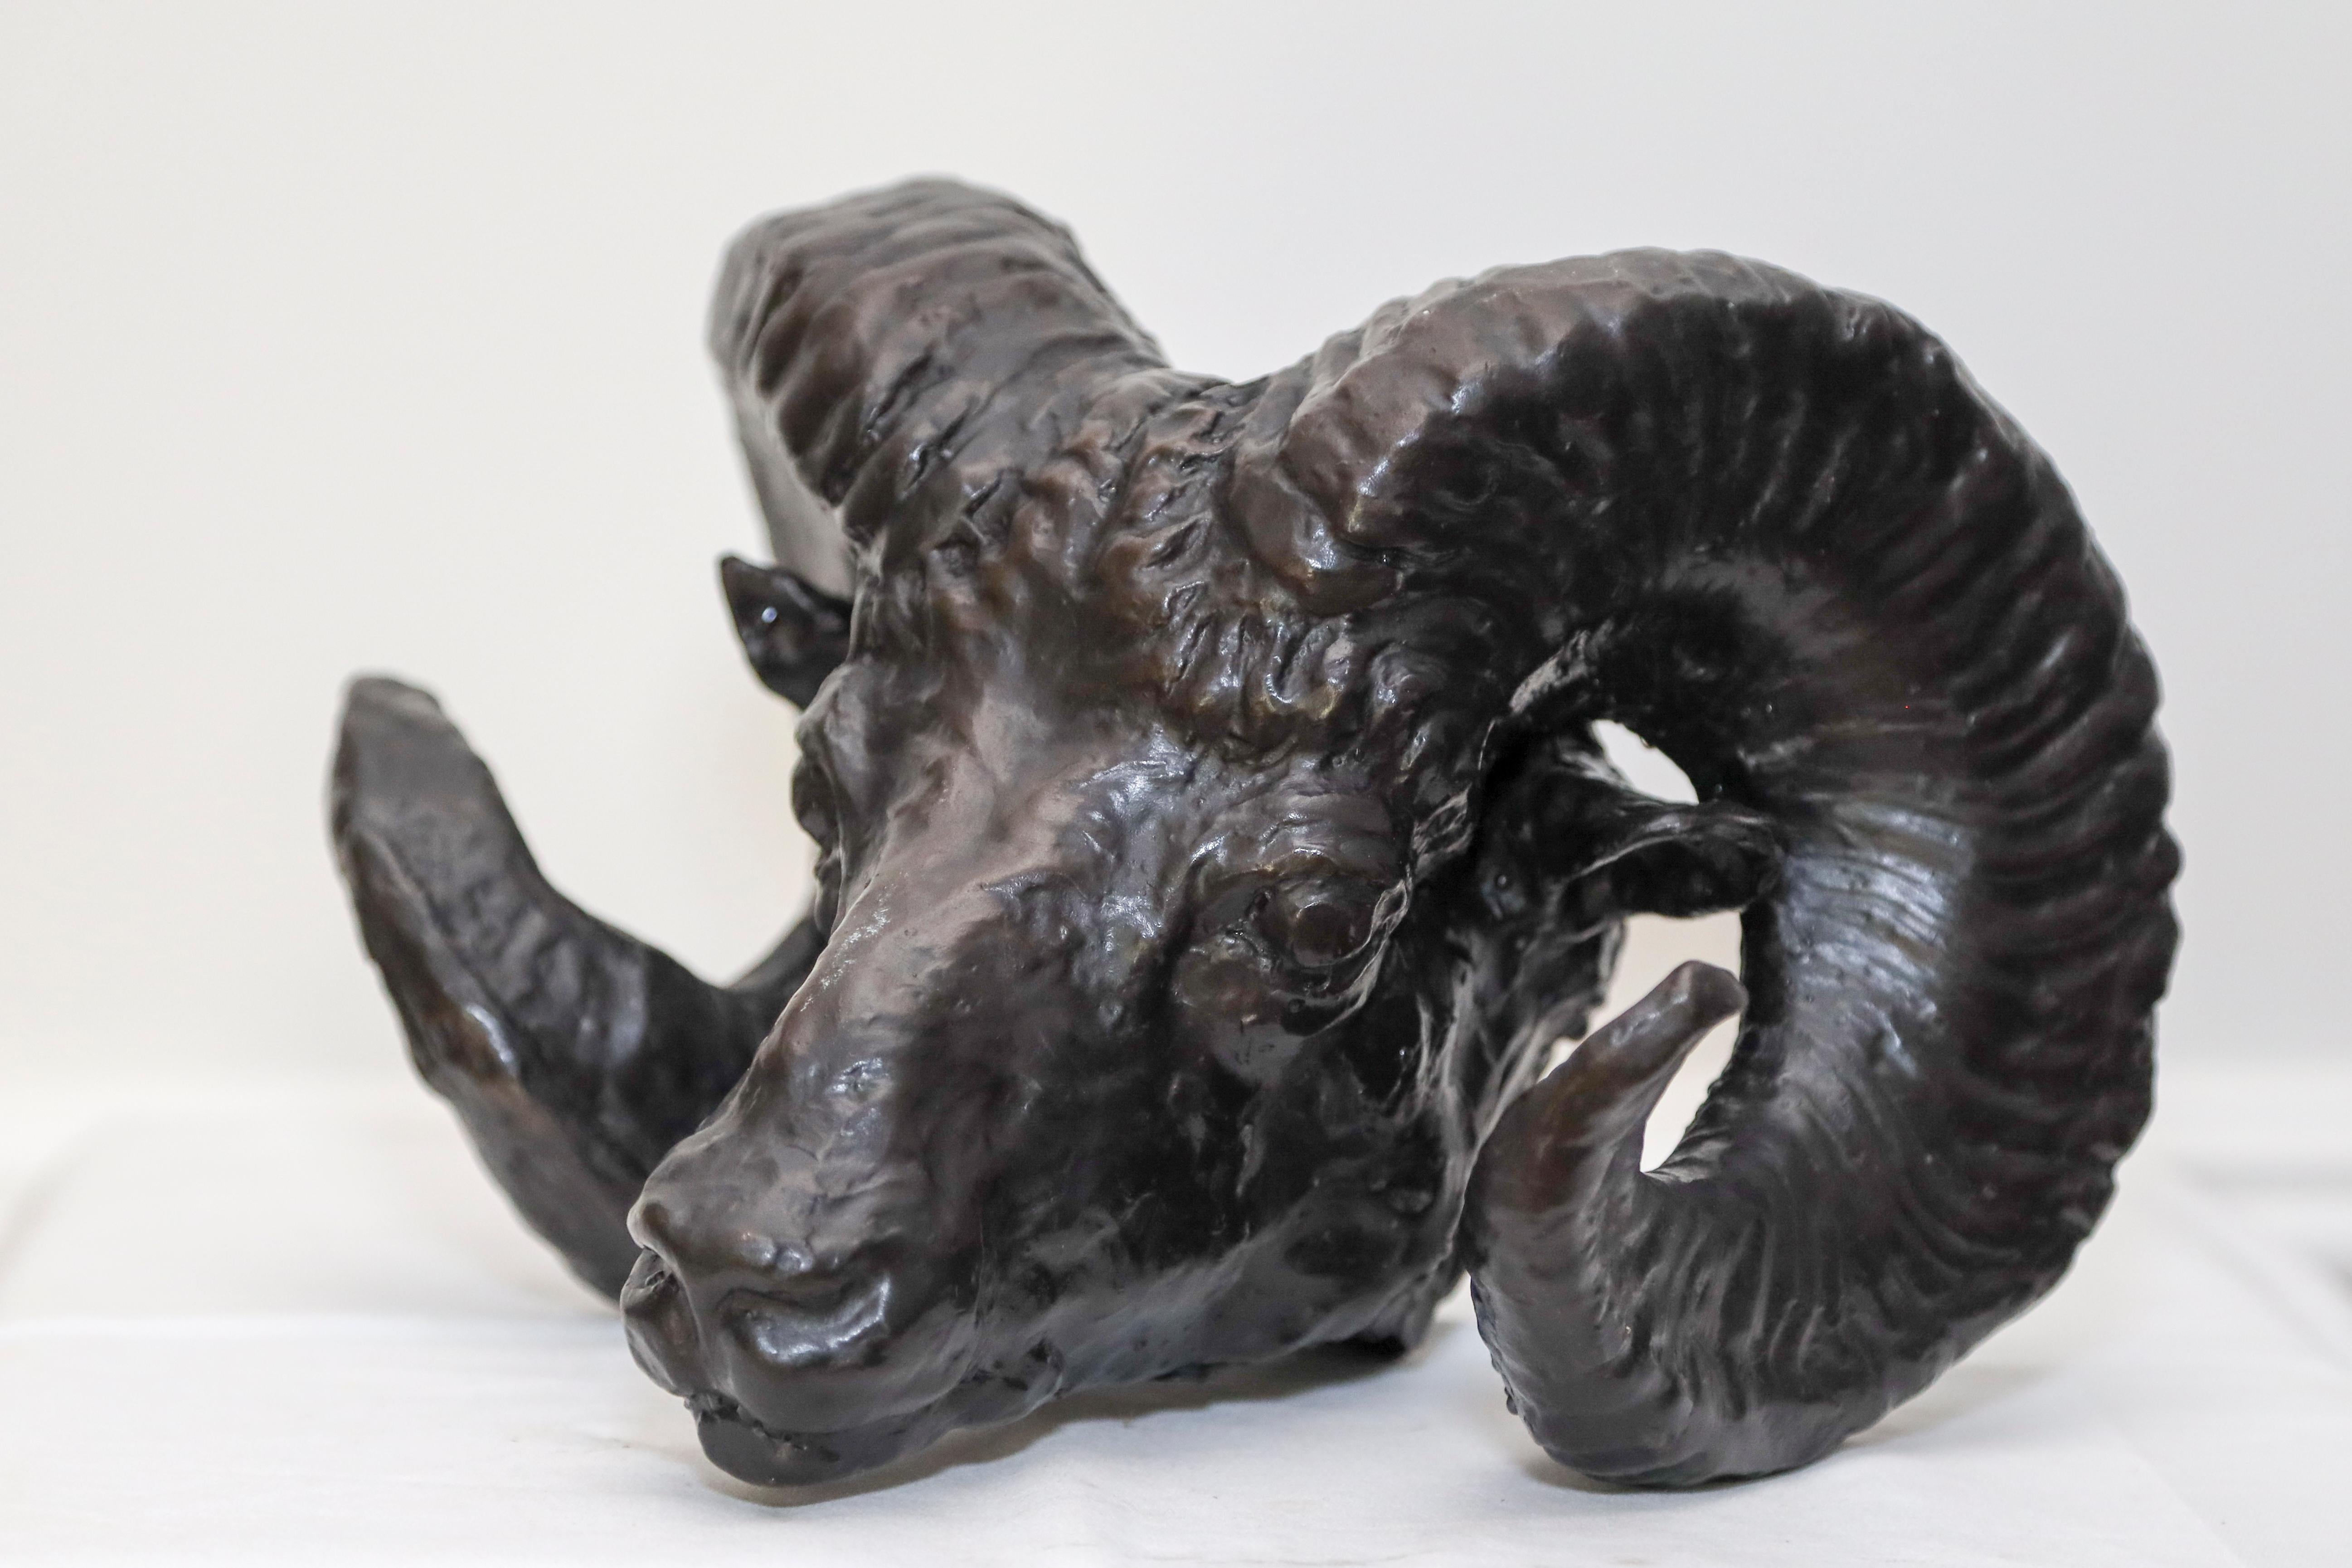 Rams Head Sculpture in Bronze by Charles Rumsey - Gold Figurative Sculpture by Charles Cary Rumsey